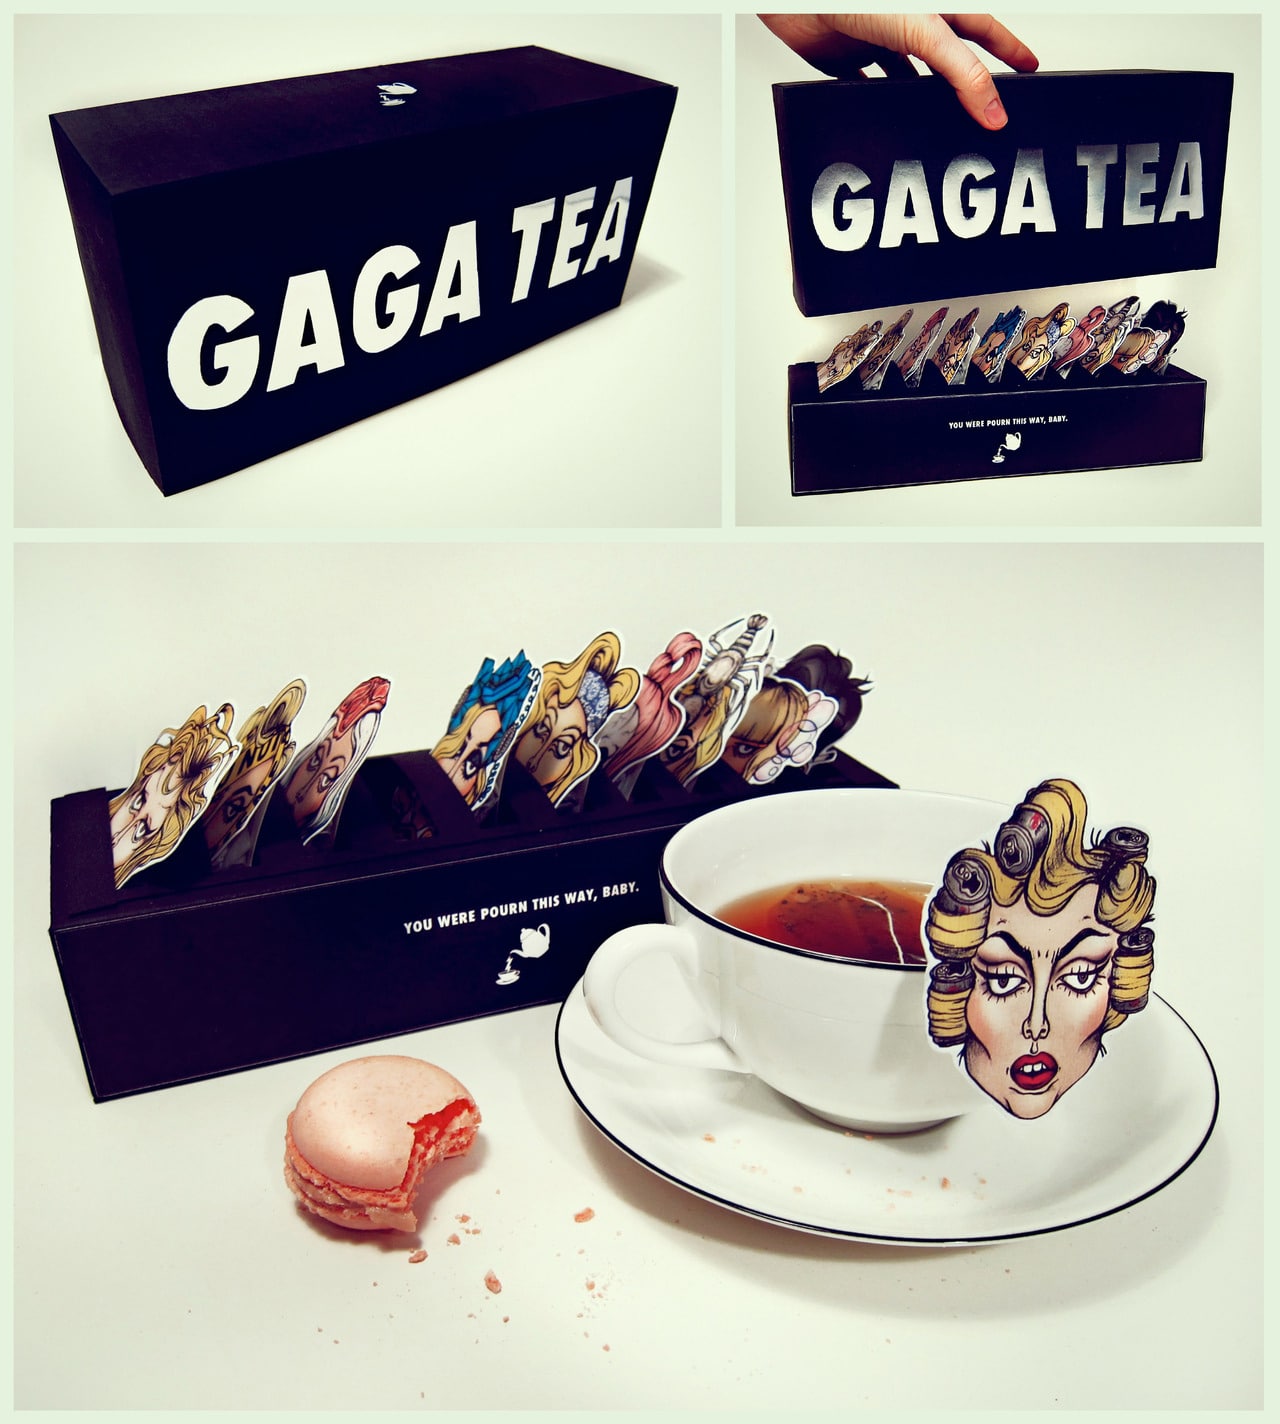 Lady Gaga Tea Bags: Baby You Were Pourn This Way